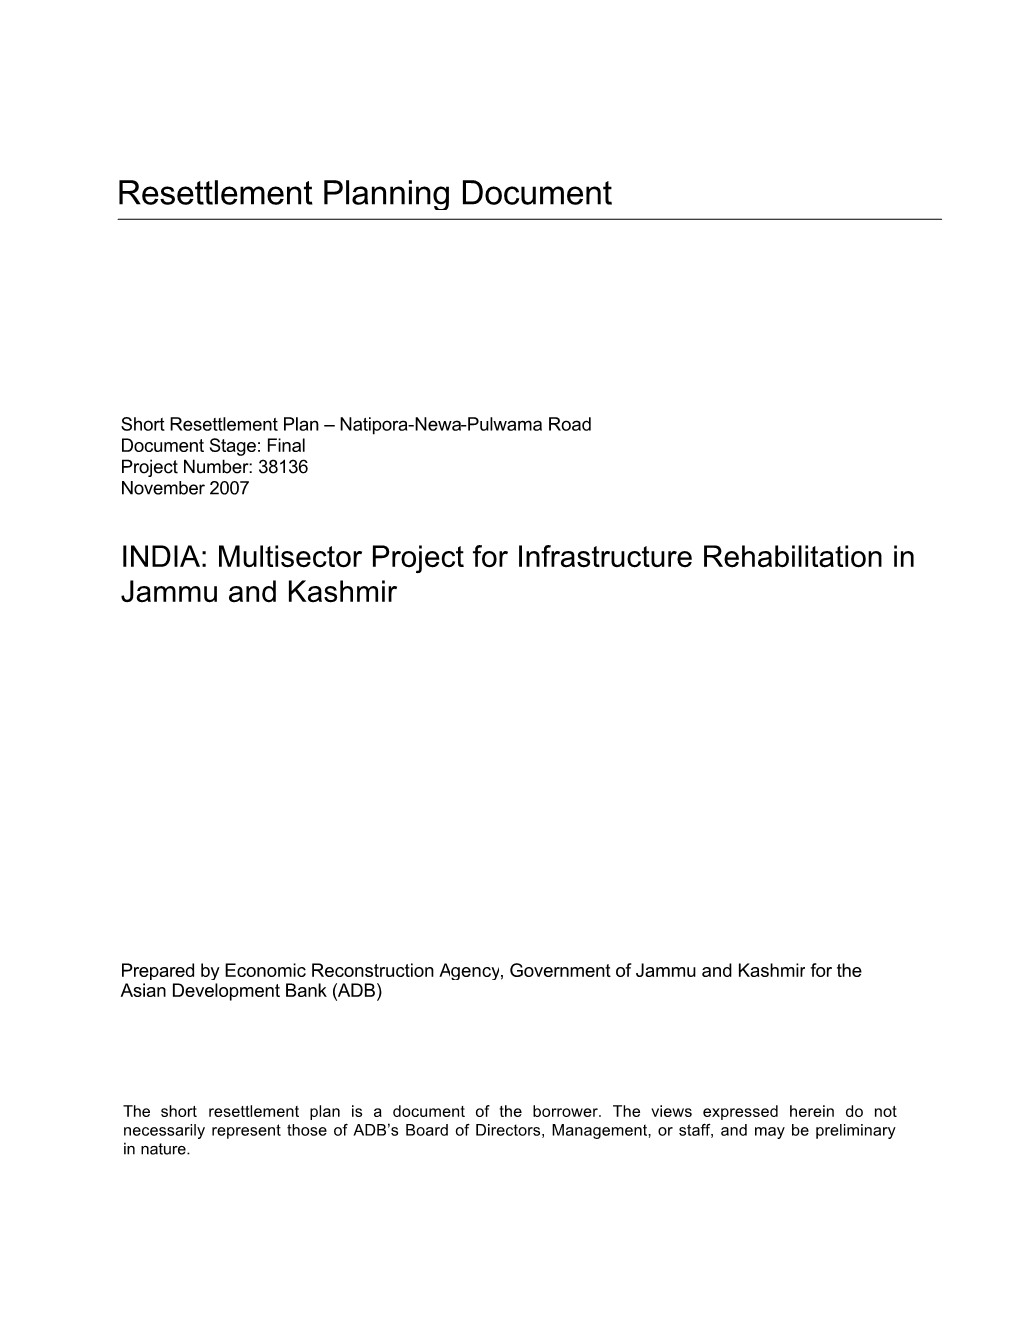 Multi-Sector Project for Infrastructure Rehabilitation In